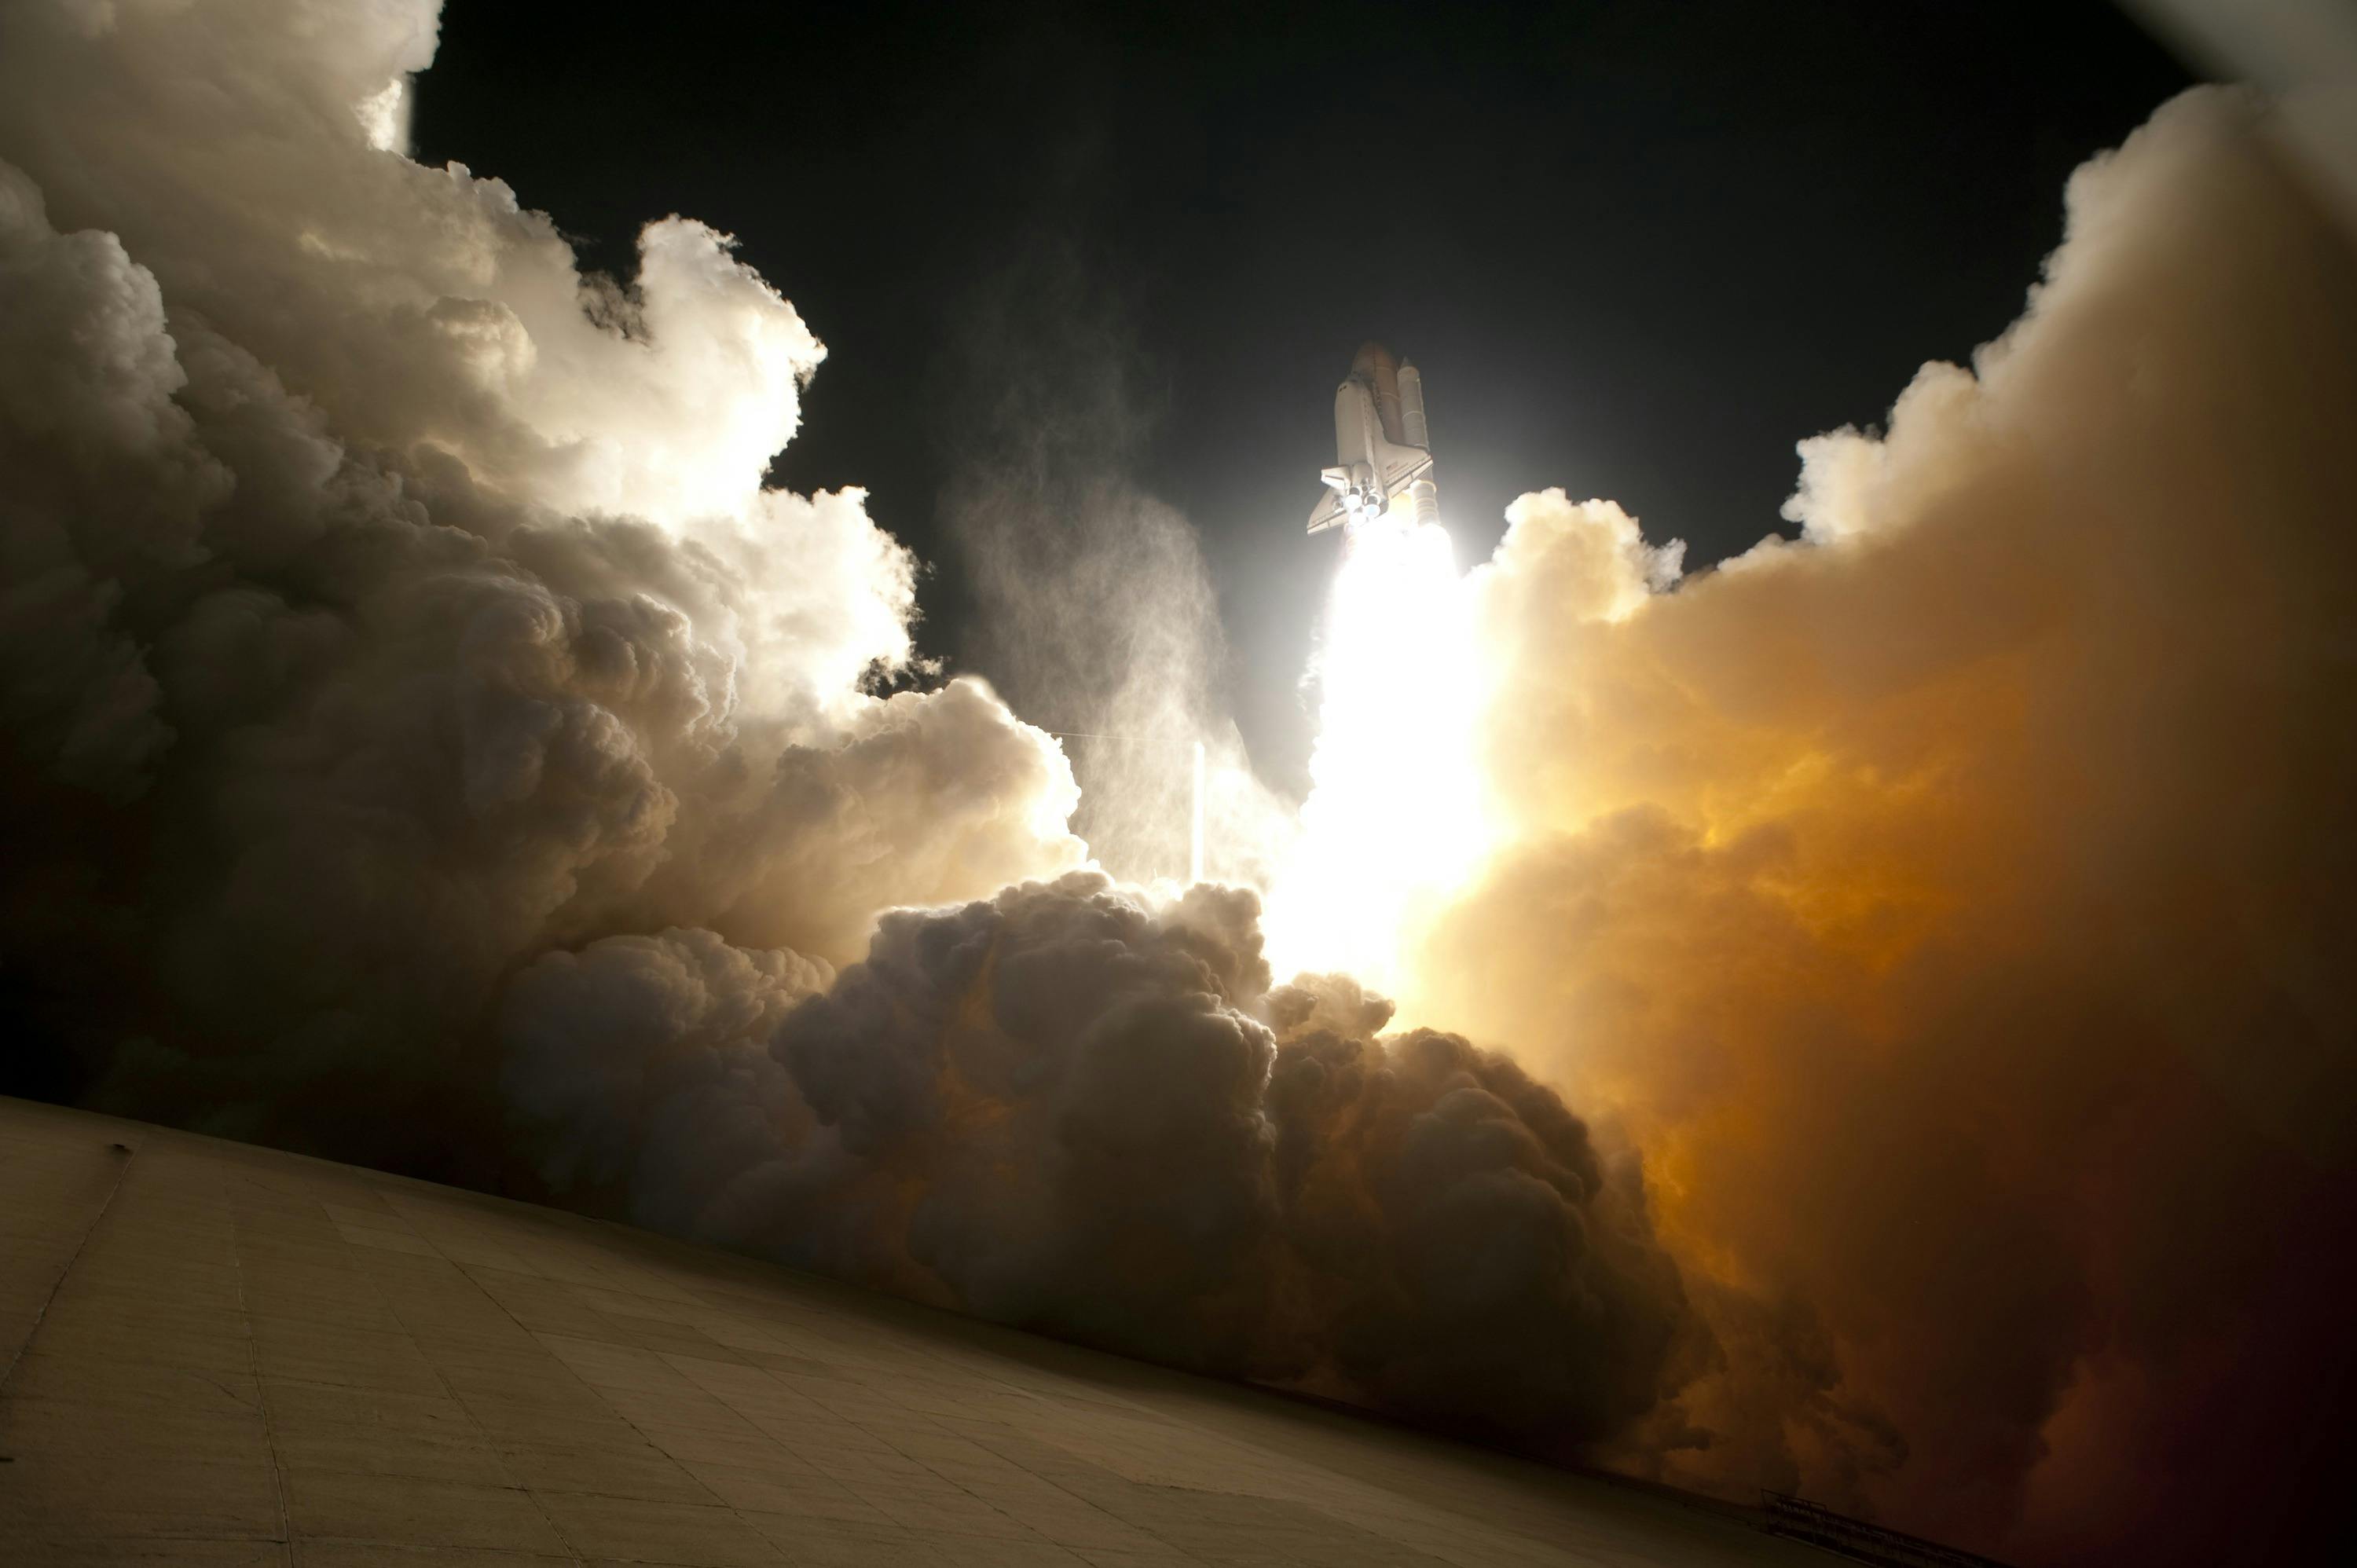 HD wallpaper Space shuttle taking off during night time STS128 launch  nasa  Wallpaper Flare